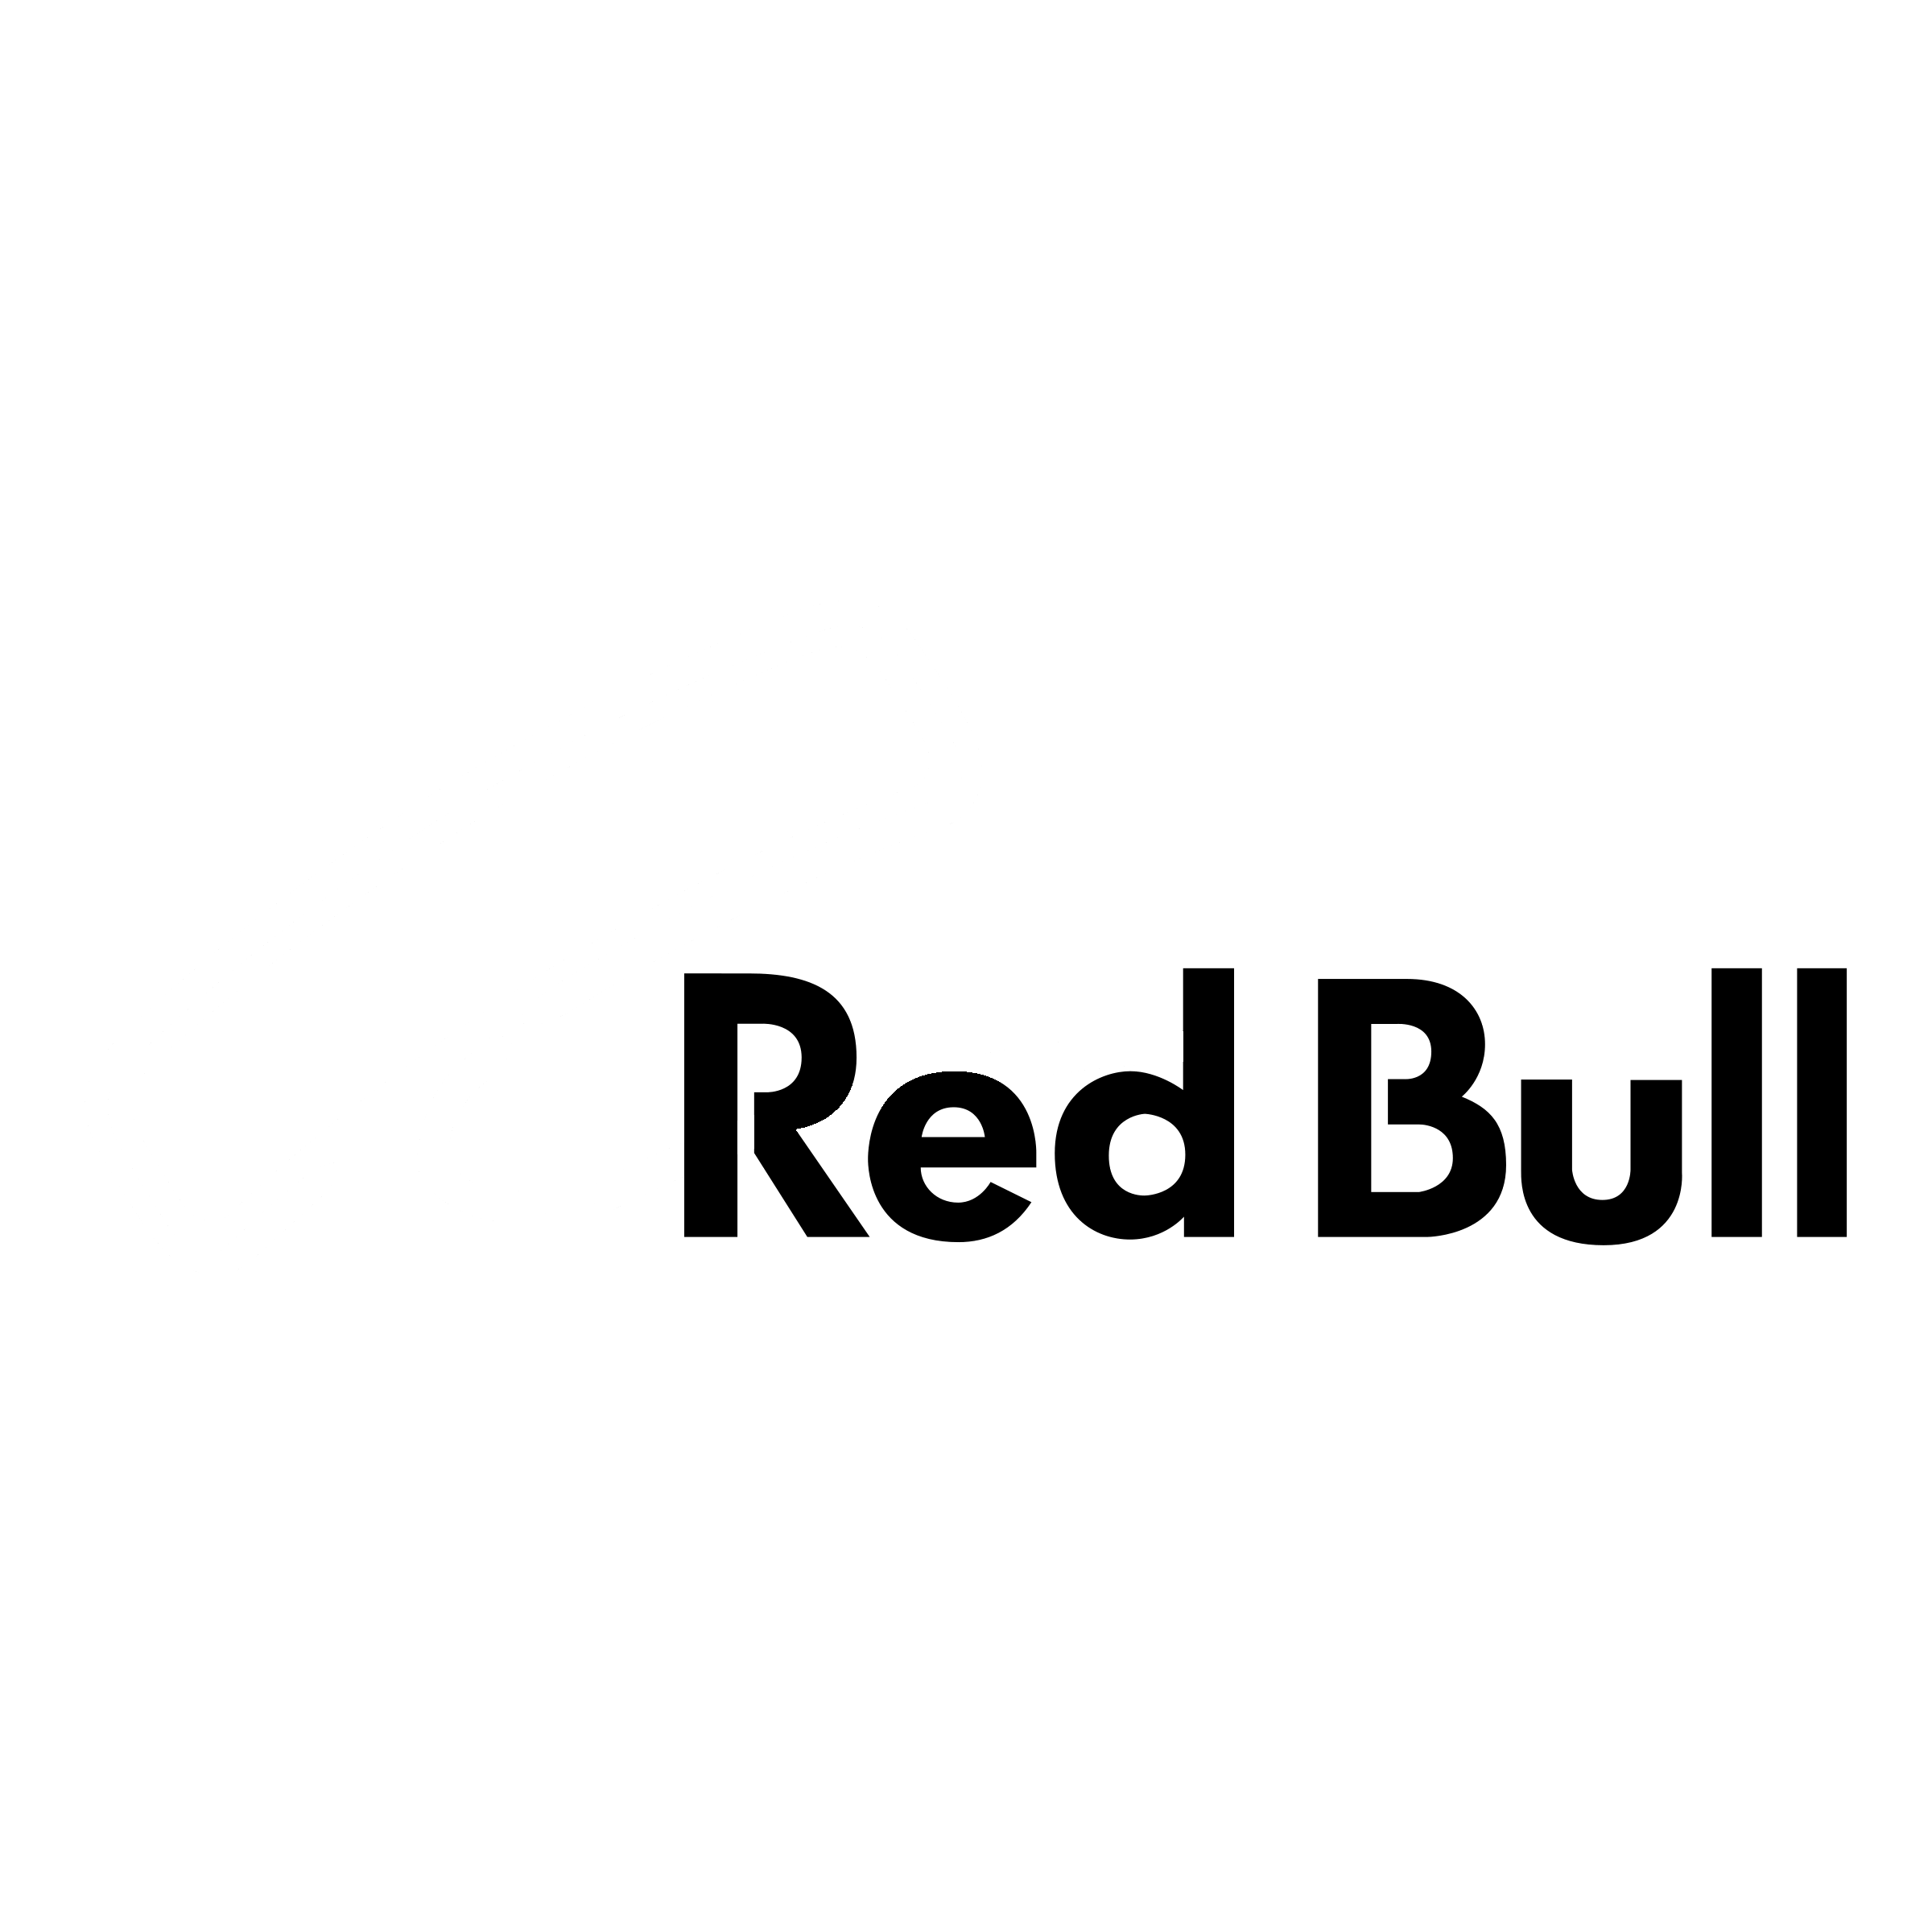 Black White and Red Bull Logo - Smirnoff Red Bull Logo PNG Transparent & SVG Vector - Freebie Supply